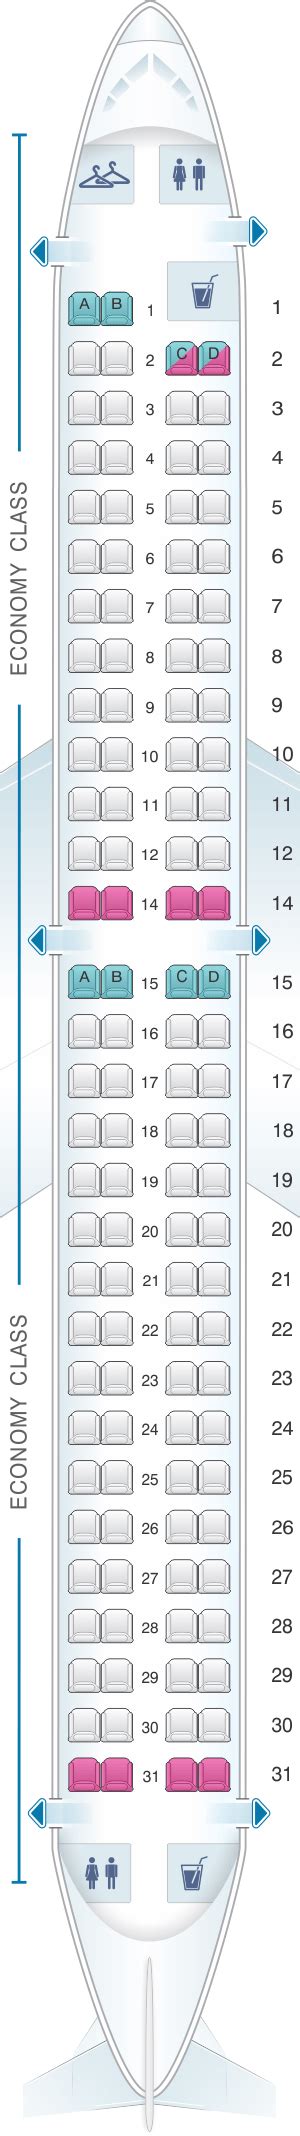 Embraer Emb 175 Jet Seating Chart Flybe Awesome Home